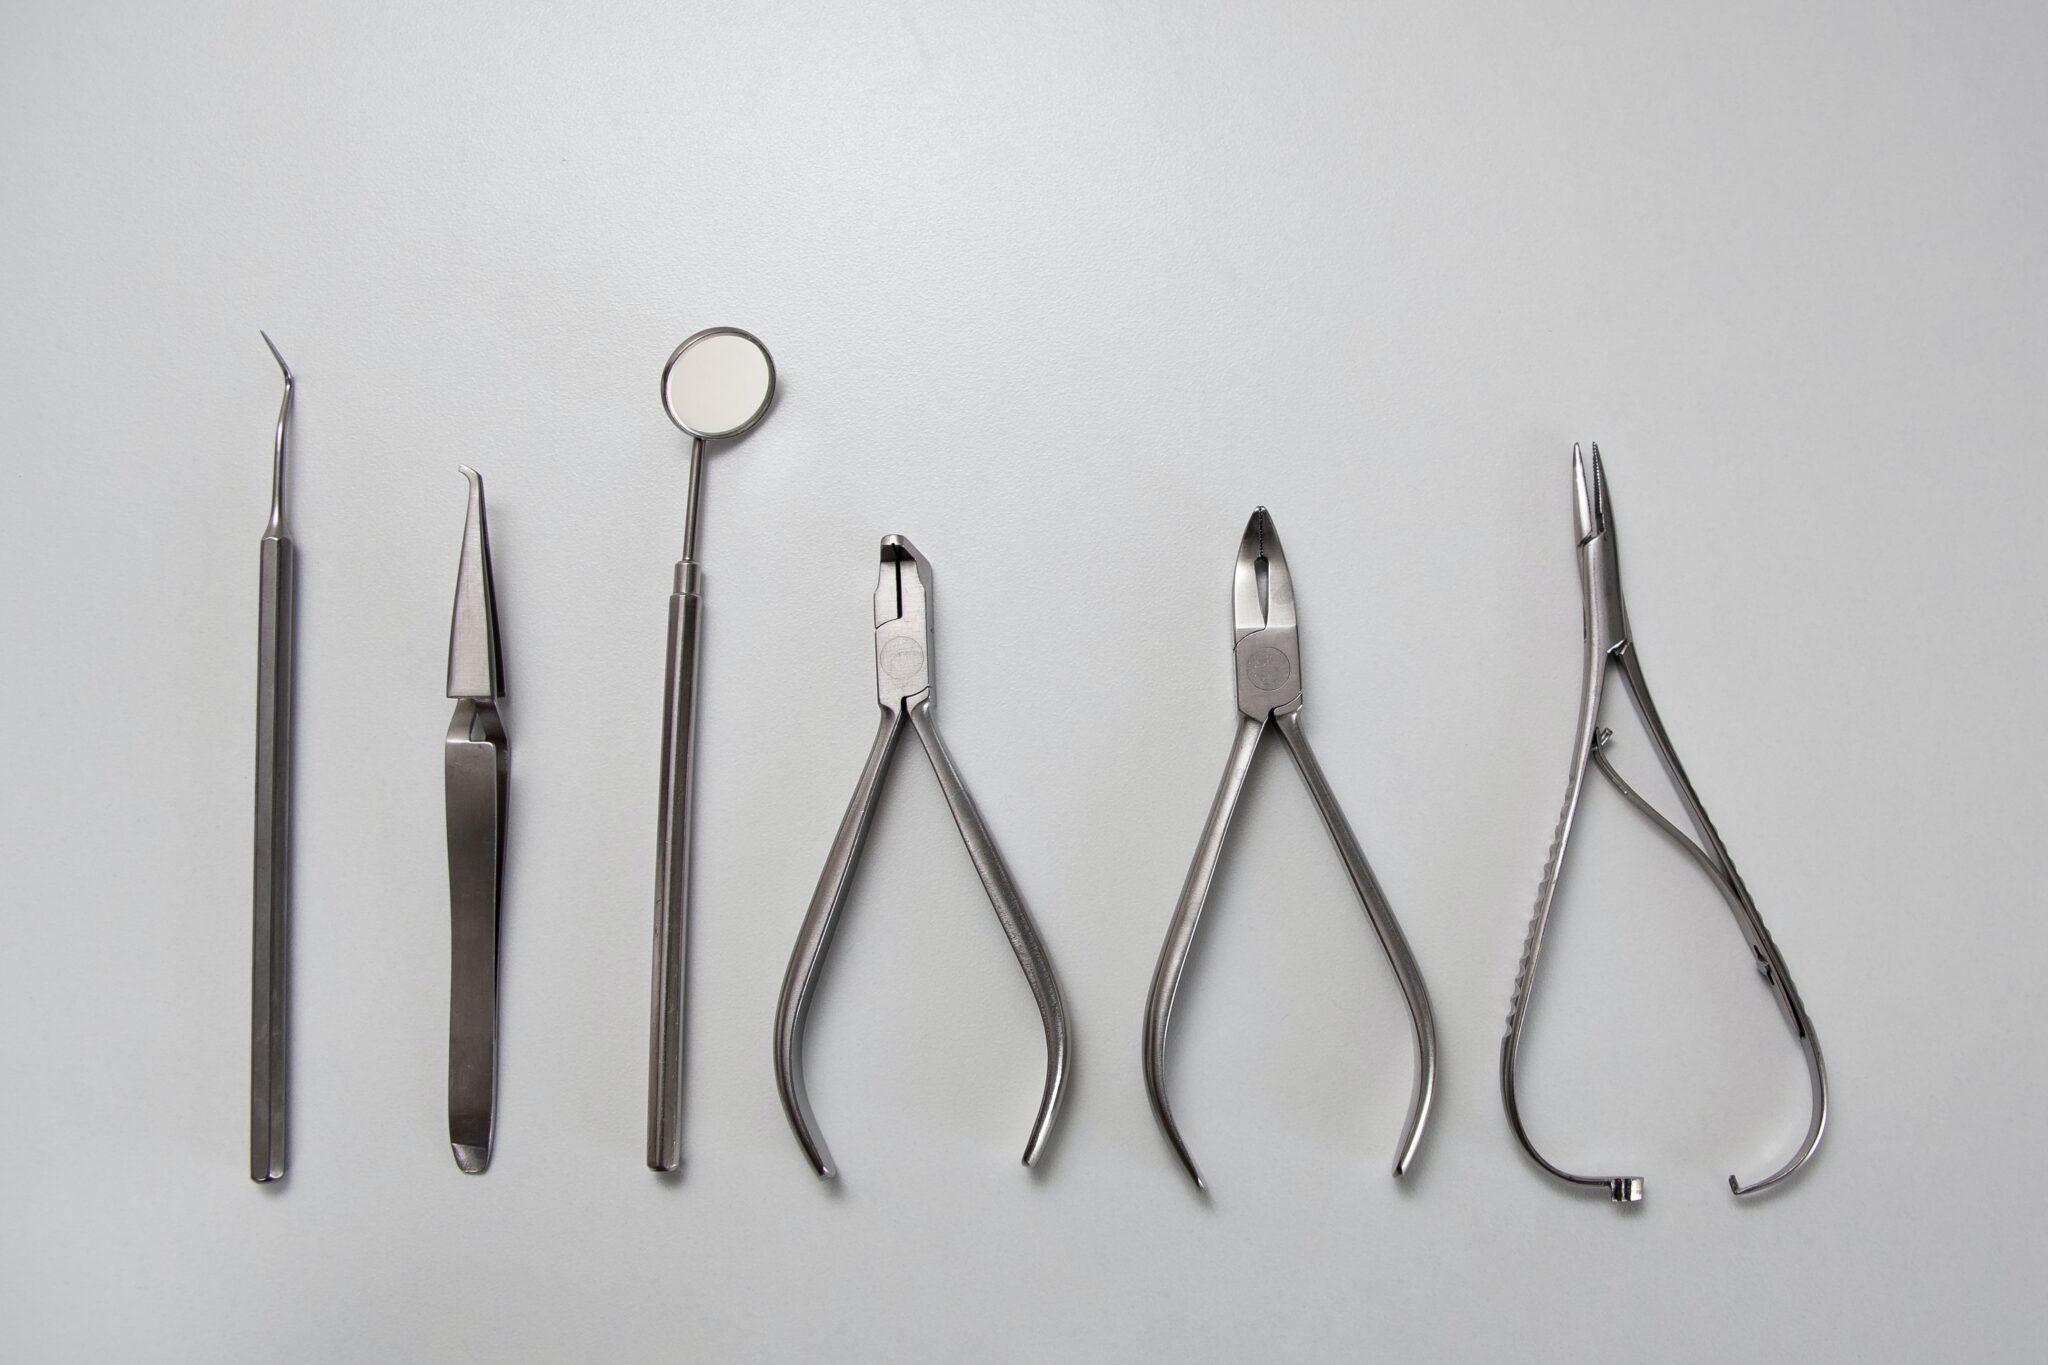 surgical implements